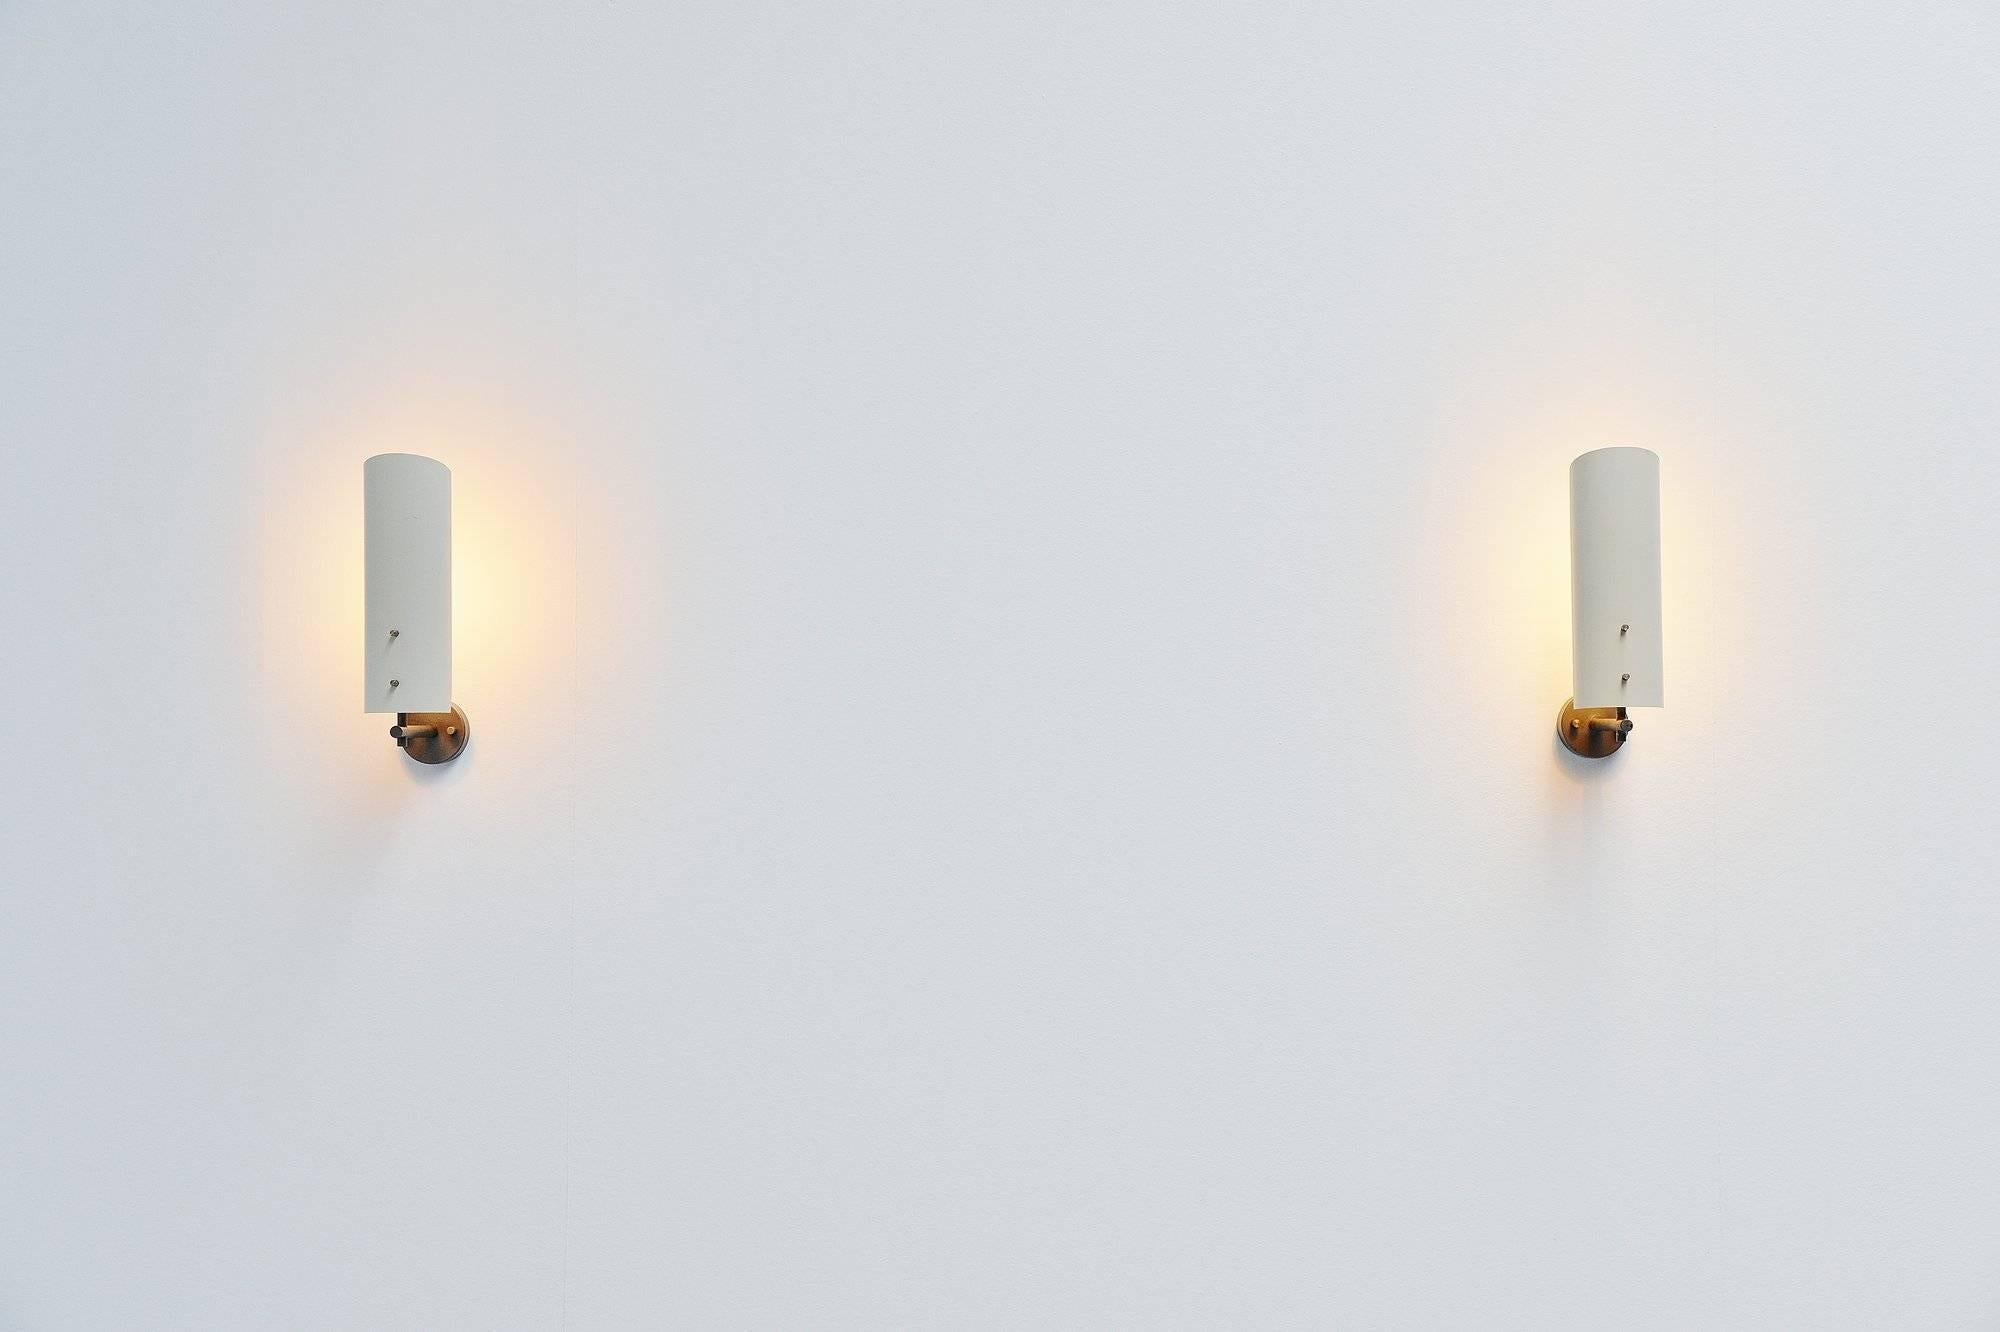 Rare pair of wall lamps model 7082 designed by JJM Hoogervorst for Anvia Almelo, Holland 1955. These lamps have a grey painted arm and off-white painted shade. The shade can rotate for a different light beam. Very nice pair, can be used as bed lamps